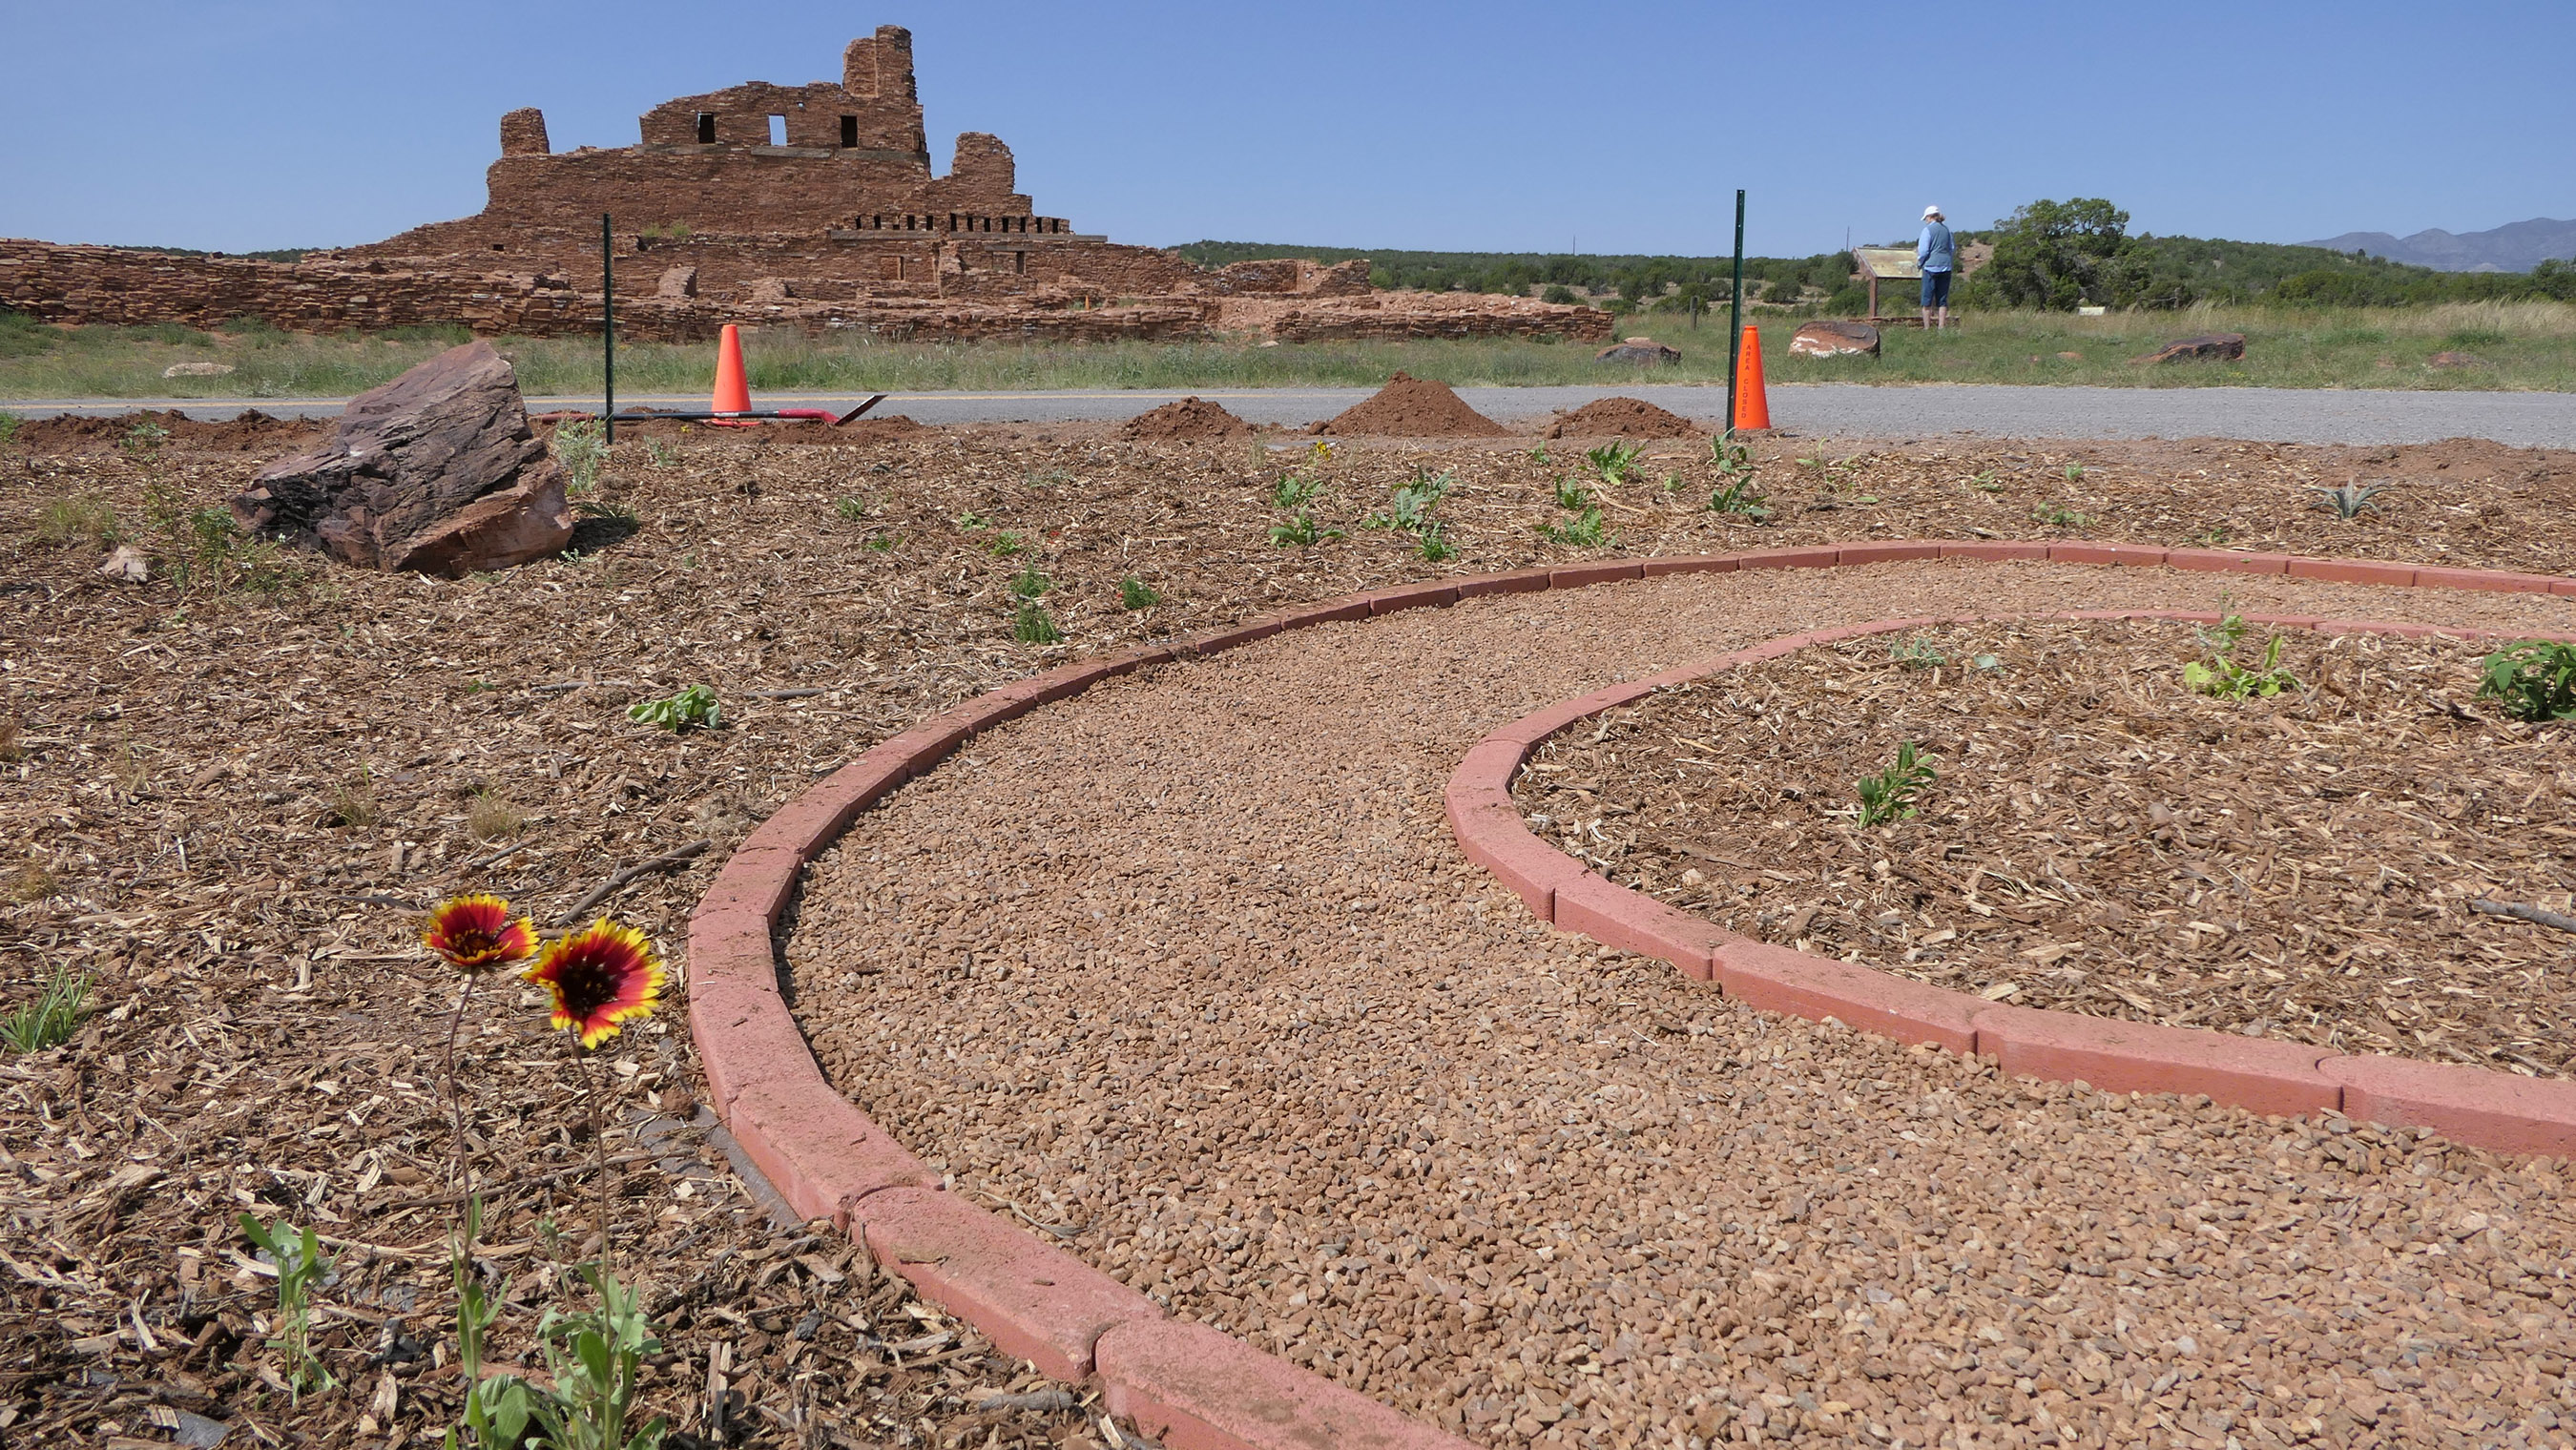 A pair of red-and-yellow flowers bloom in a newly planted pollinator garden. Behind them stands part of the ancient Salinas Pueblo Mission